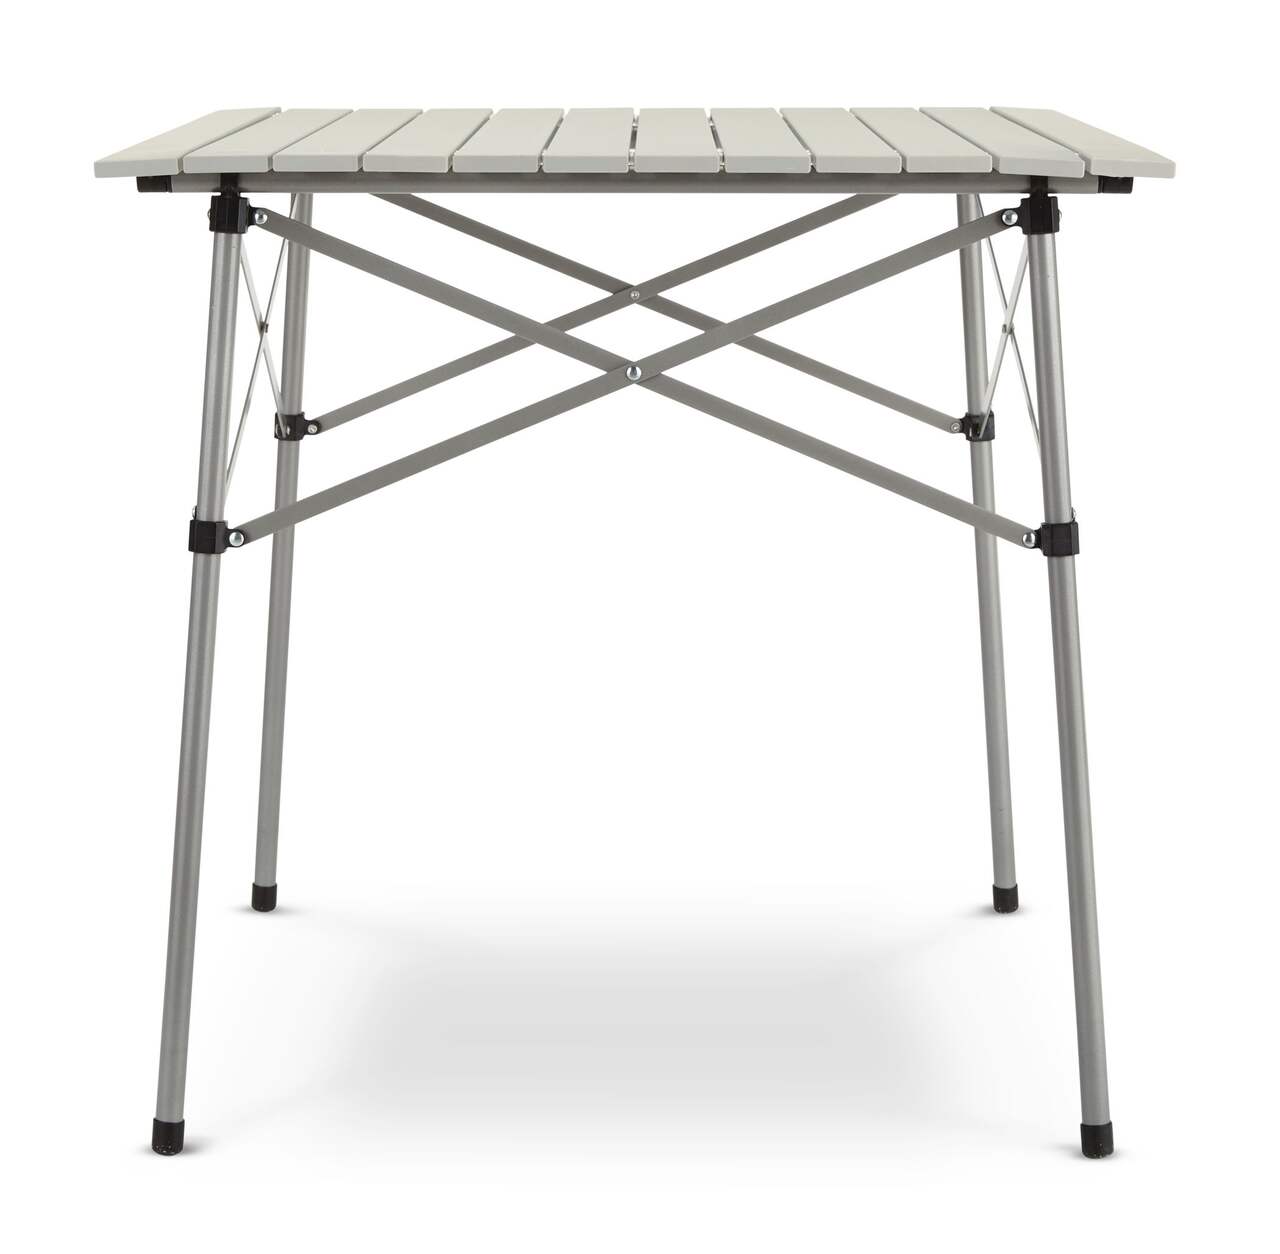 https://media-www.canadiantire.ca/product/playing/camping/camping-furniture/0765543/woods-quad-table-9781871f-f272-4018-8d45-287d45dca277-jpgrendition.jpg?imdensity=1&imwidth=640&impolicy=mZoom